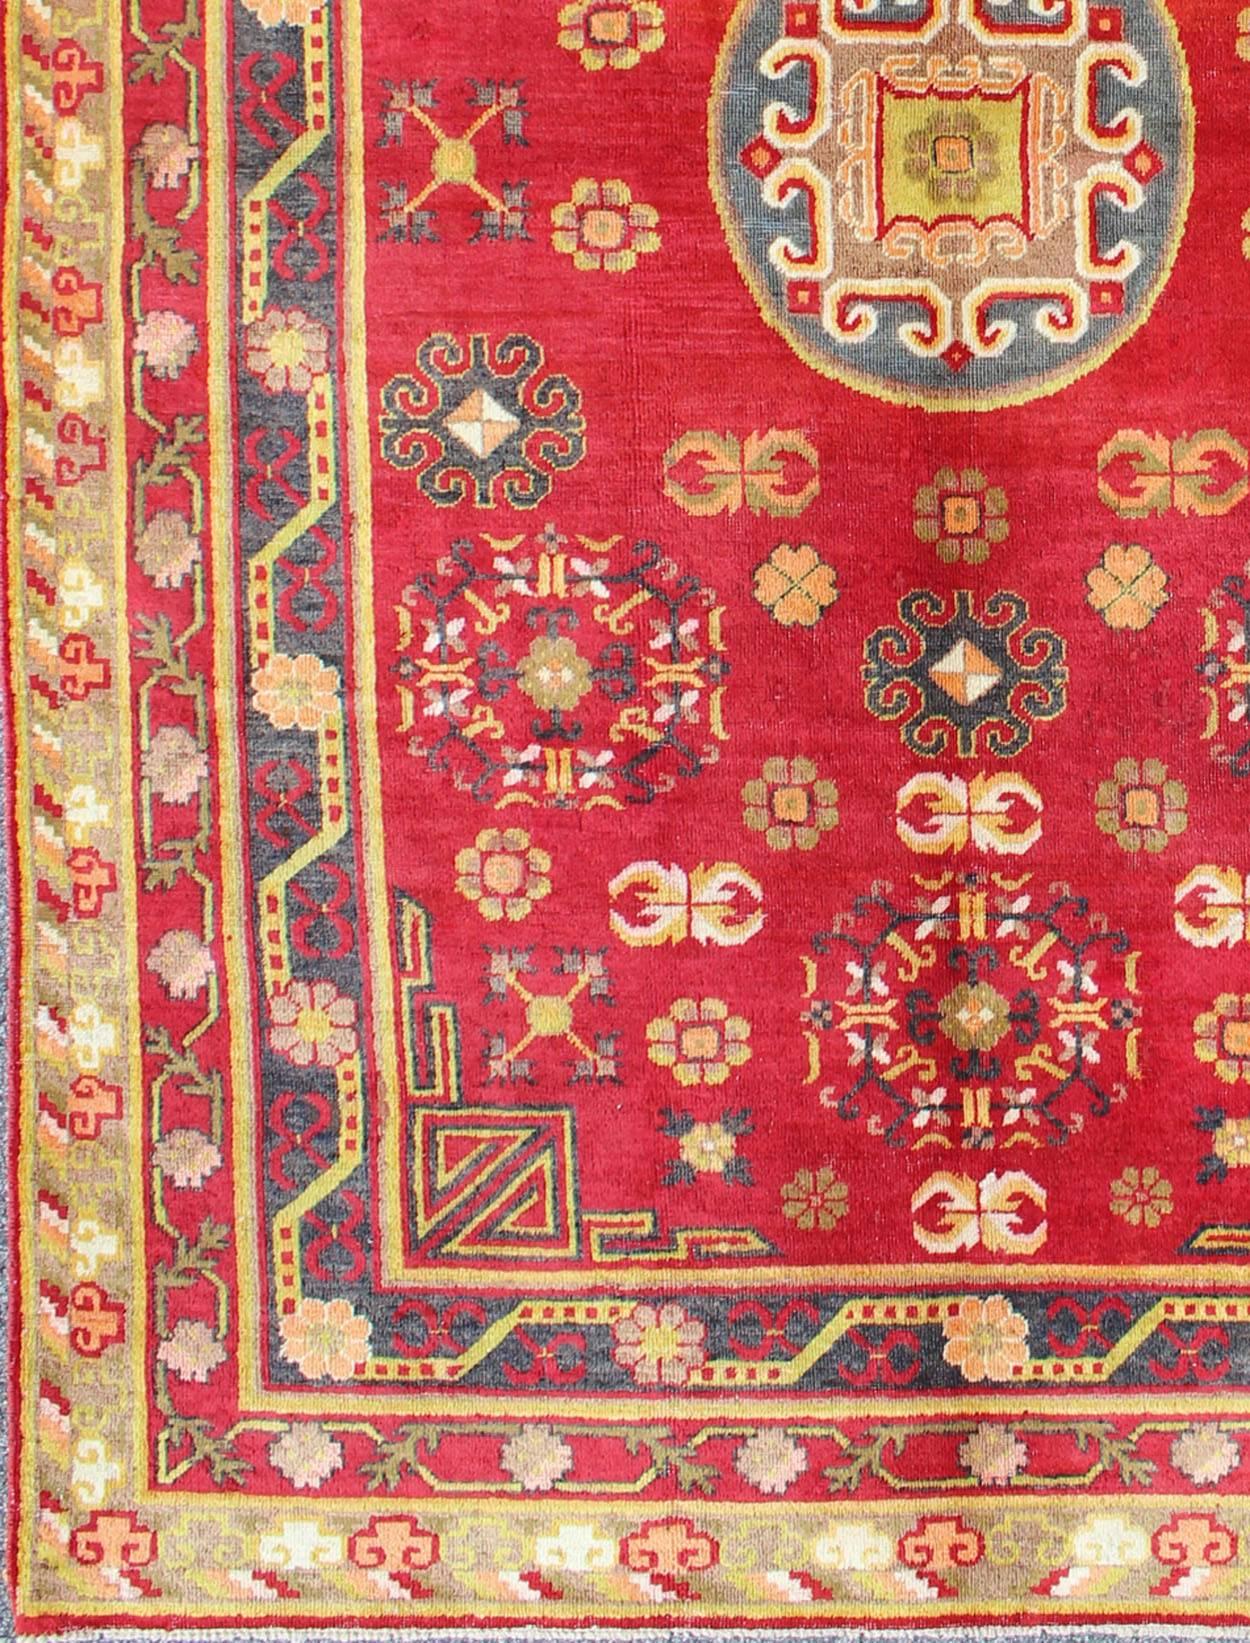 This attractive vintage Khotan rug is a spectacular testament to the complexity of Turkestan design. The red of the central field plays host to a stunning display of the entwined tree of life bearing budding blossoms and luscious pomegranates. The